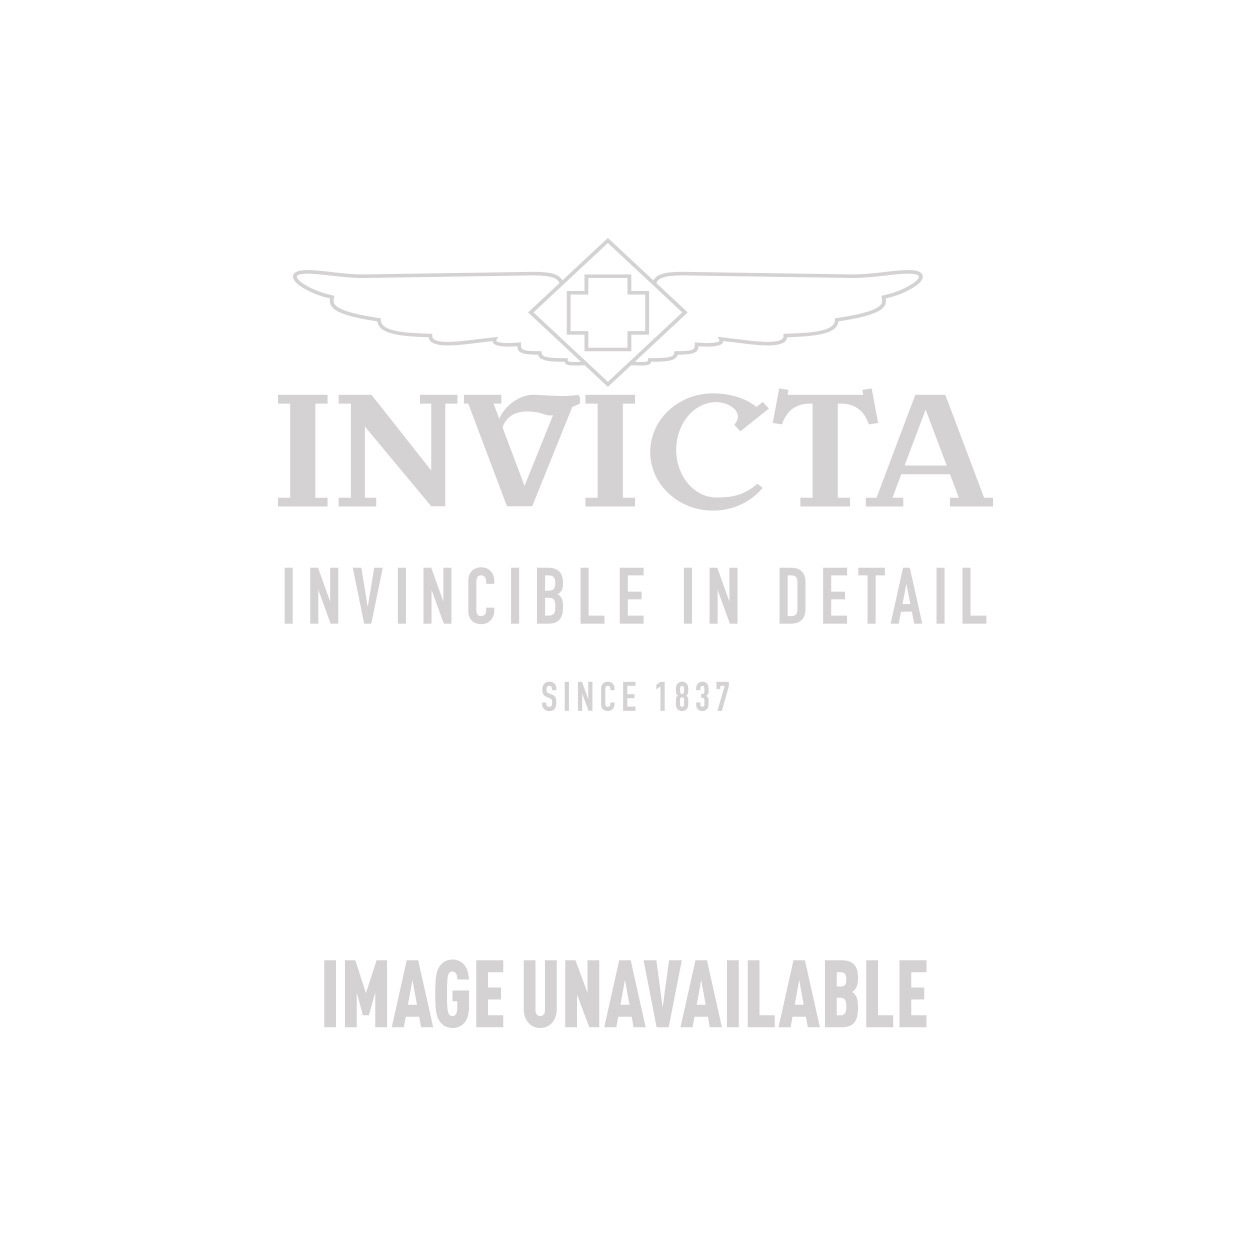 Invincible Guarantee - 100% Replacement Guarantee for Watches, Tier 10- 50-49